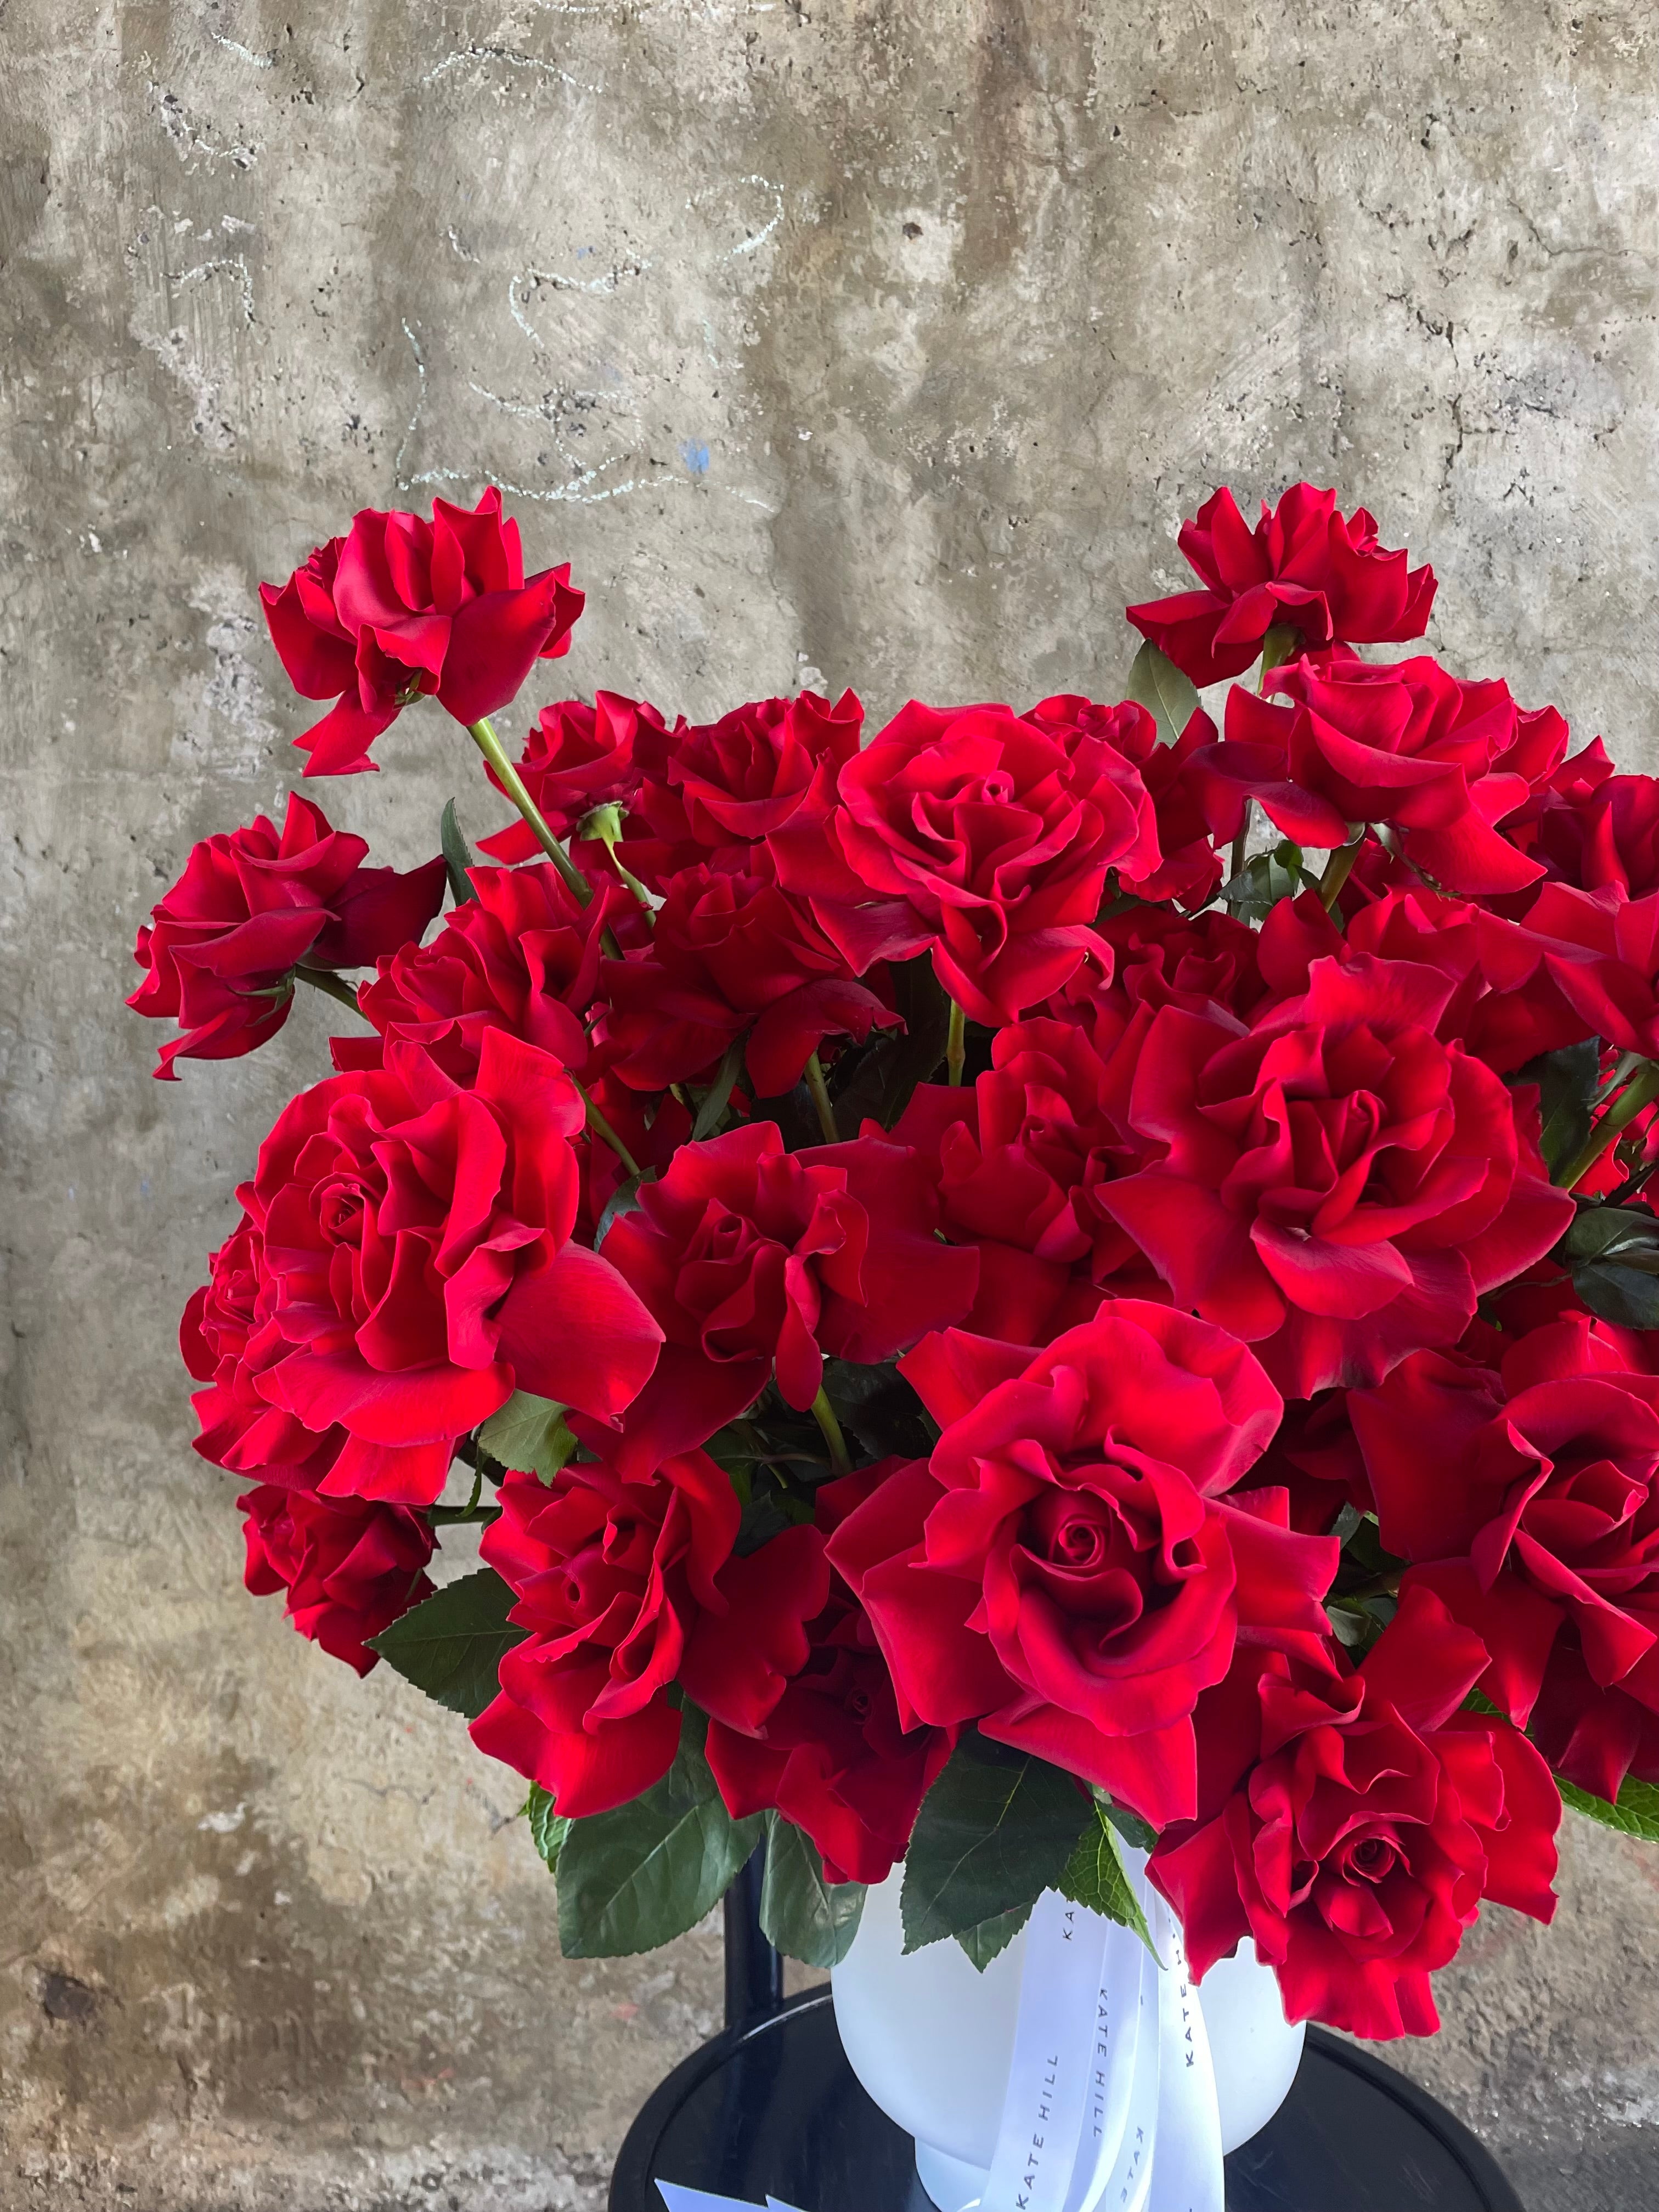 Up close image of A grande design, displaying 50 long stemmed red roses on mass in a large white footed ceramic vase. Large design is sitting on a black bentwood chair with concrete wall in the background.